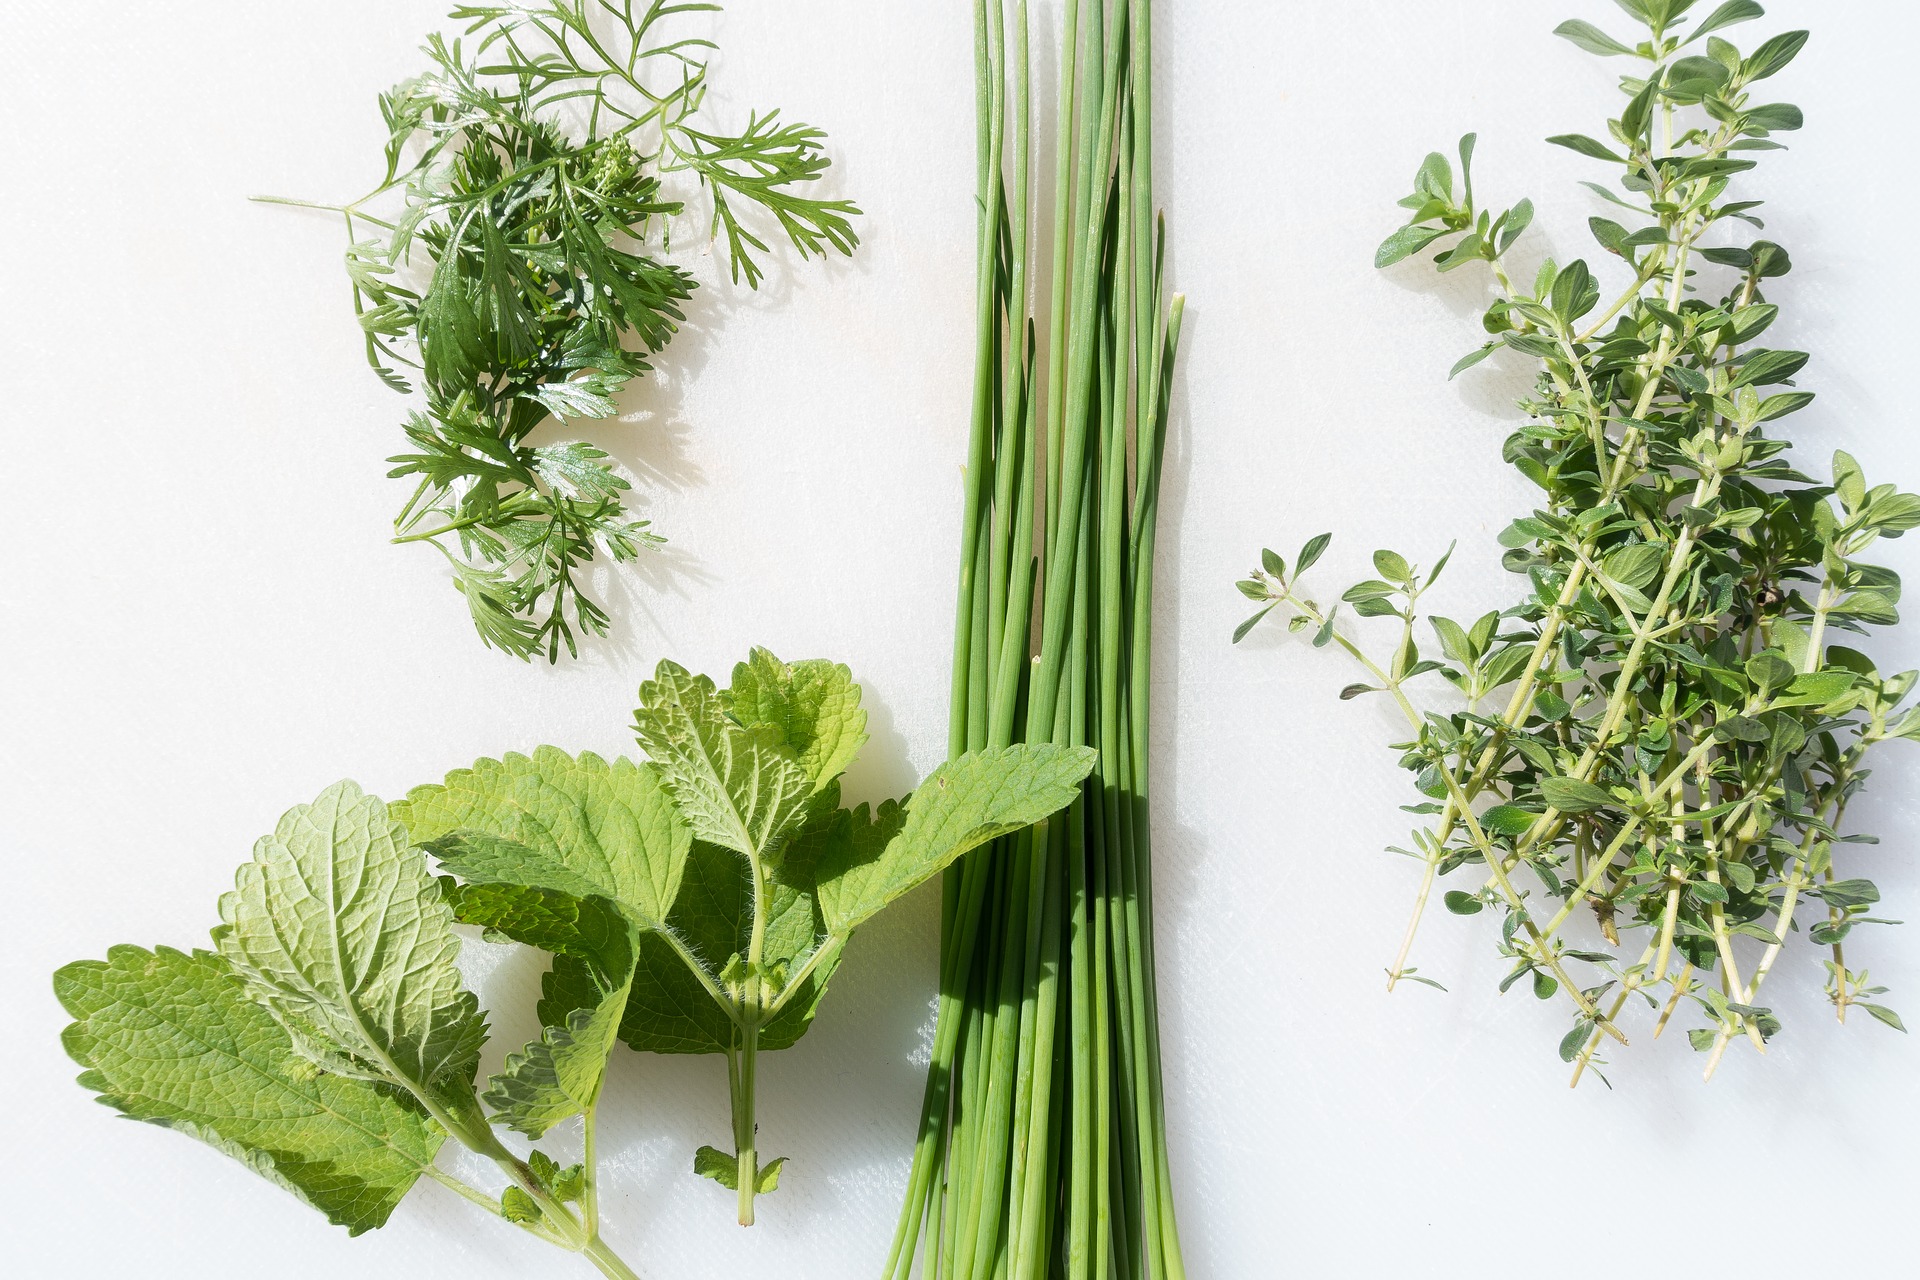 FIND OUT MORE ABOUT MIXED HERBS